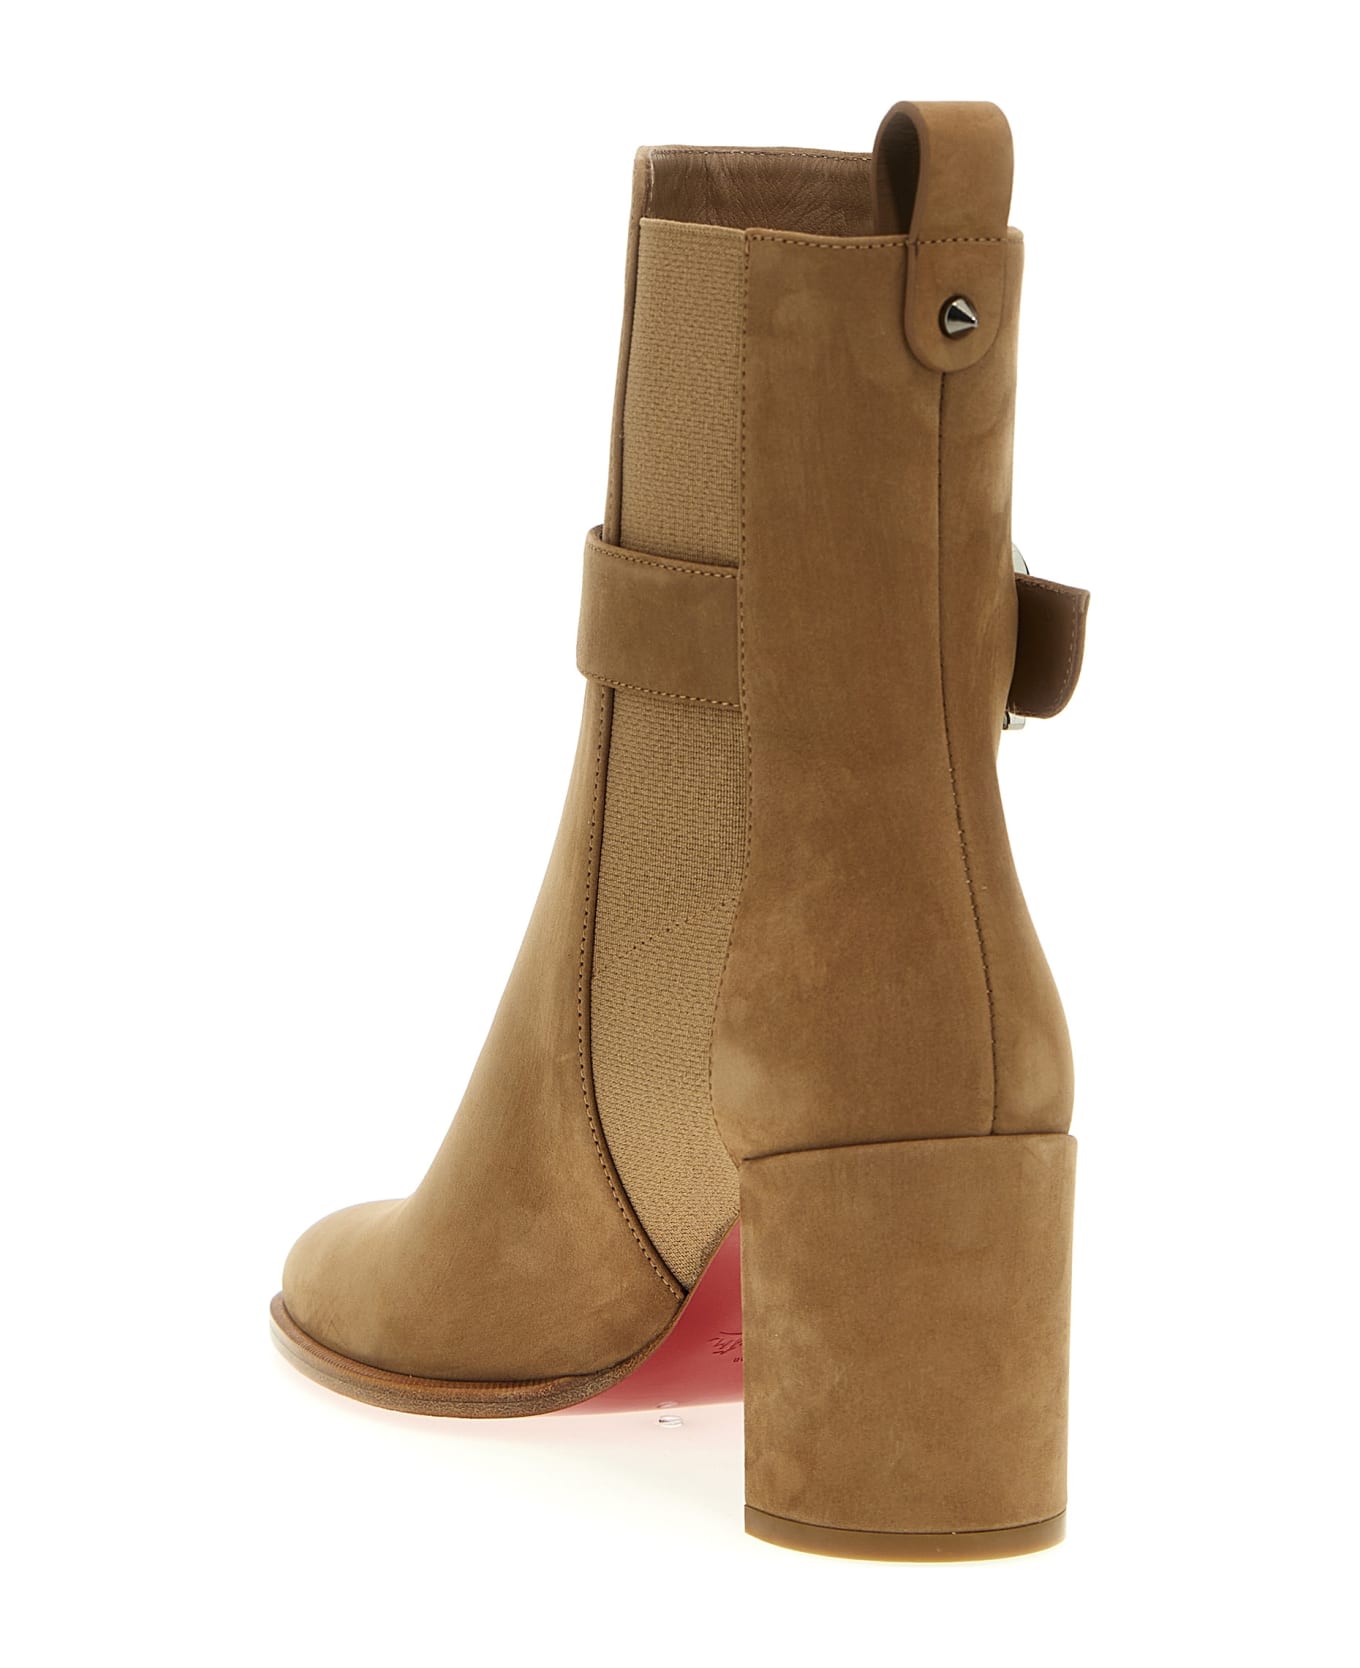 Christian Louboutin 'cl' Ankle Boots - Beige ブーツ